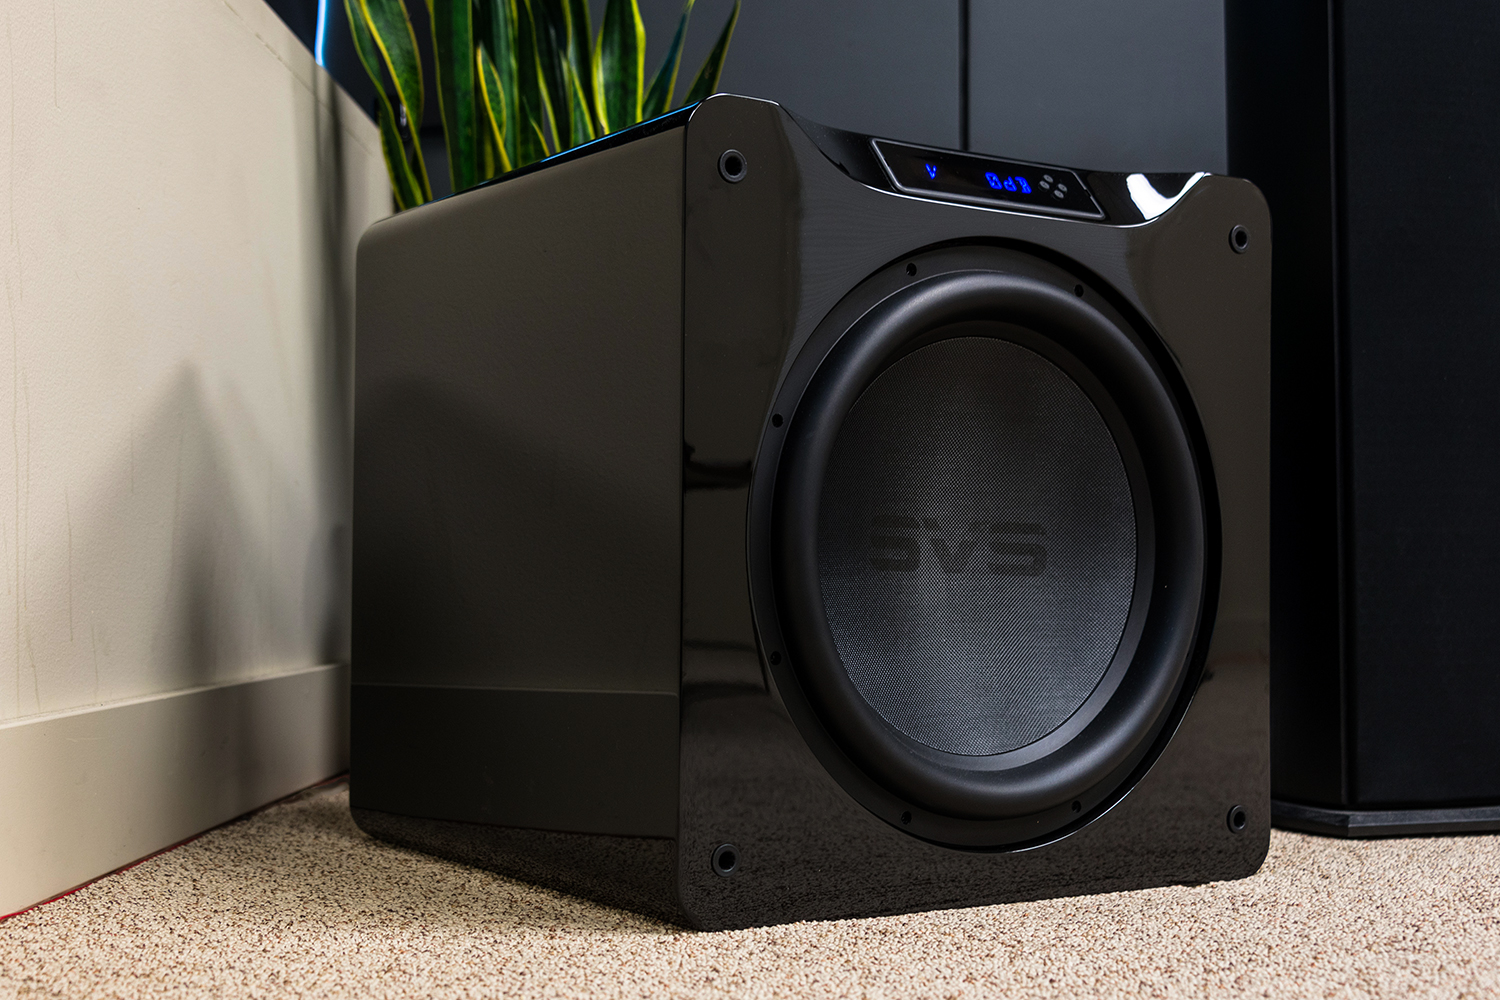 How to place and set up your subwoofer for big bass